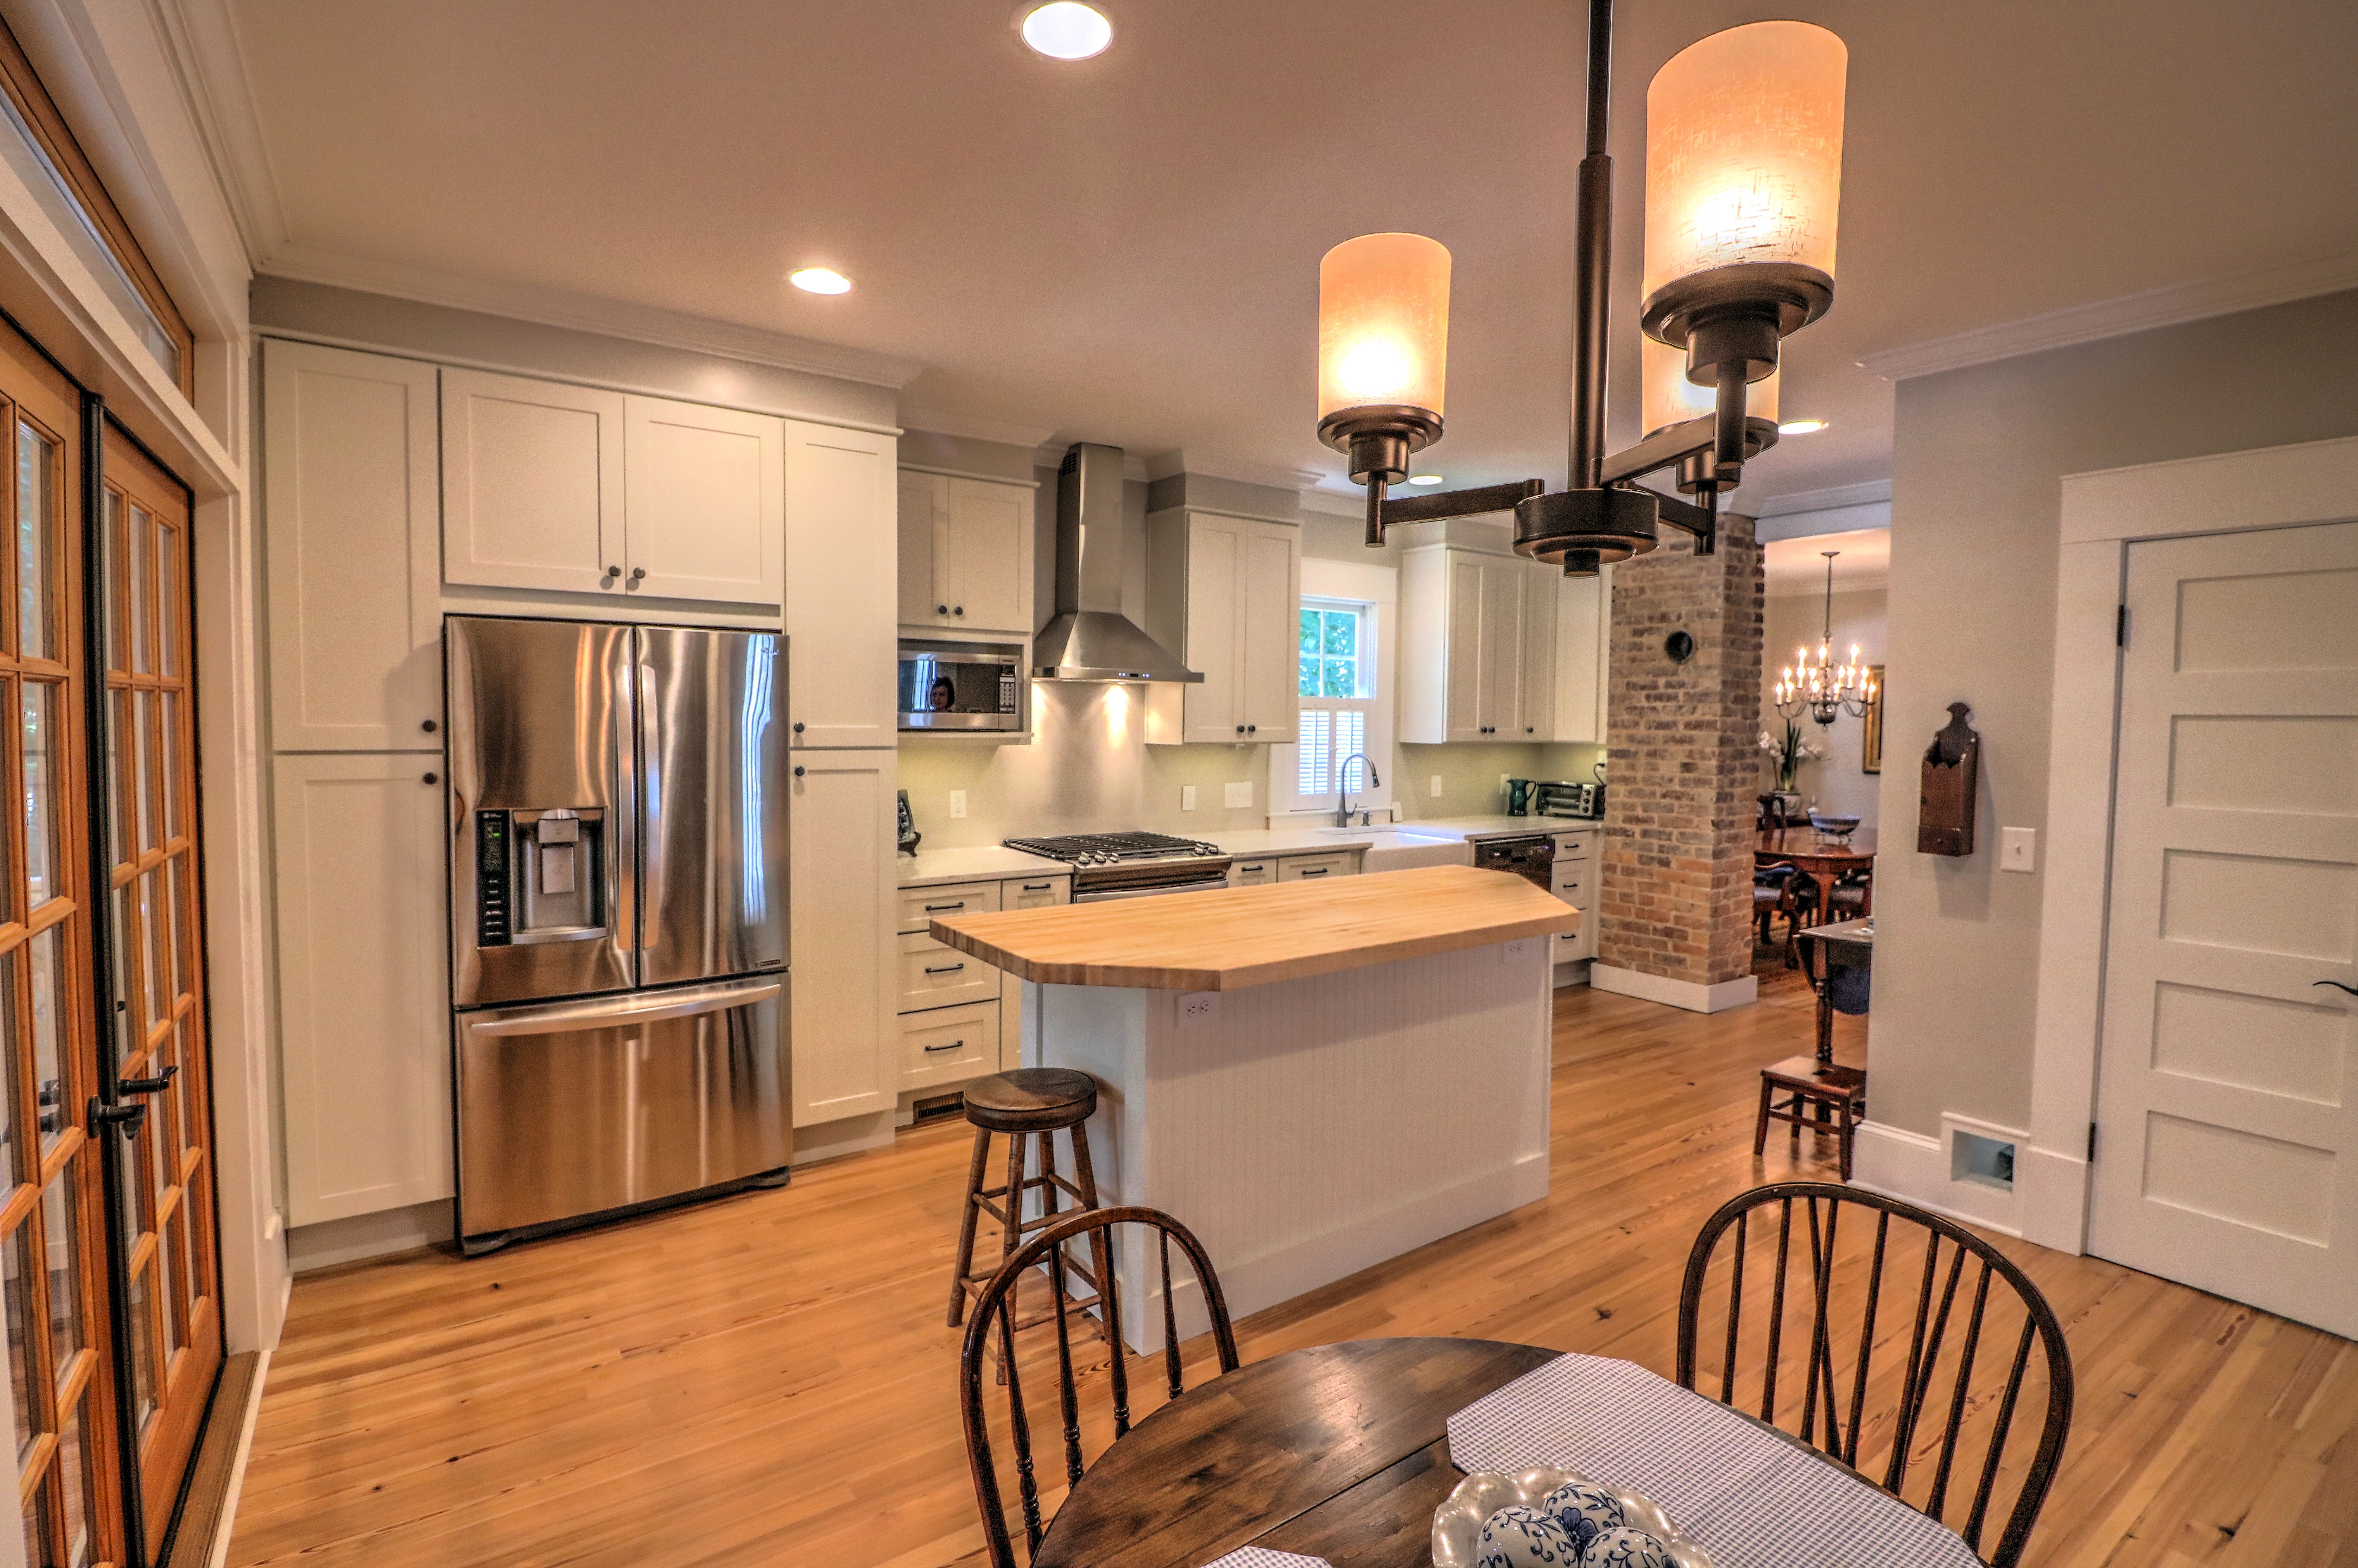 212-e-whitaker-mill-raleigh-nc-27608-breakfast-and-kitchen